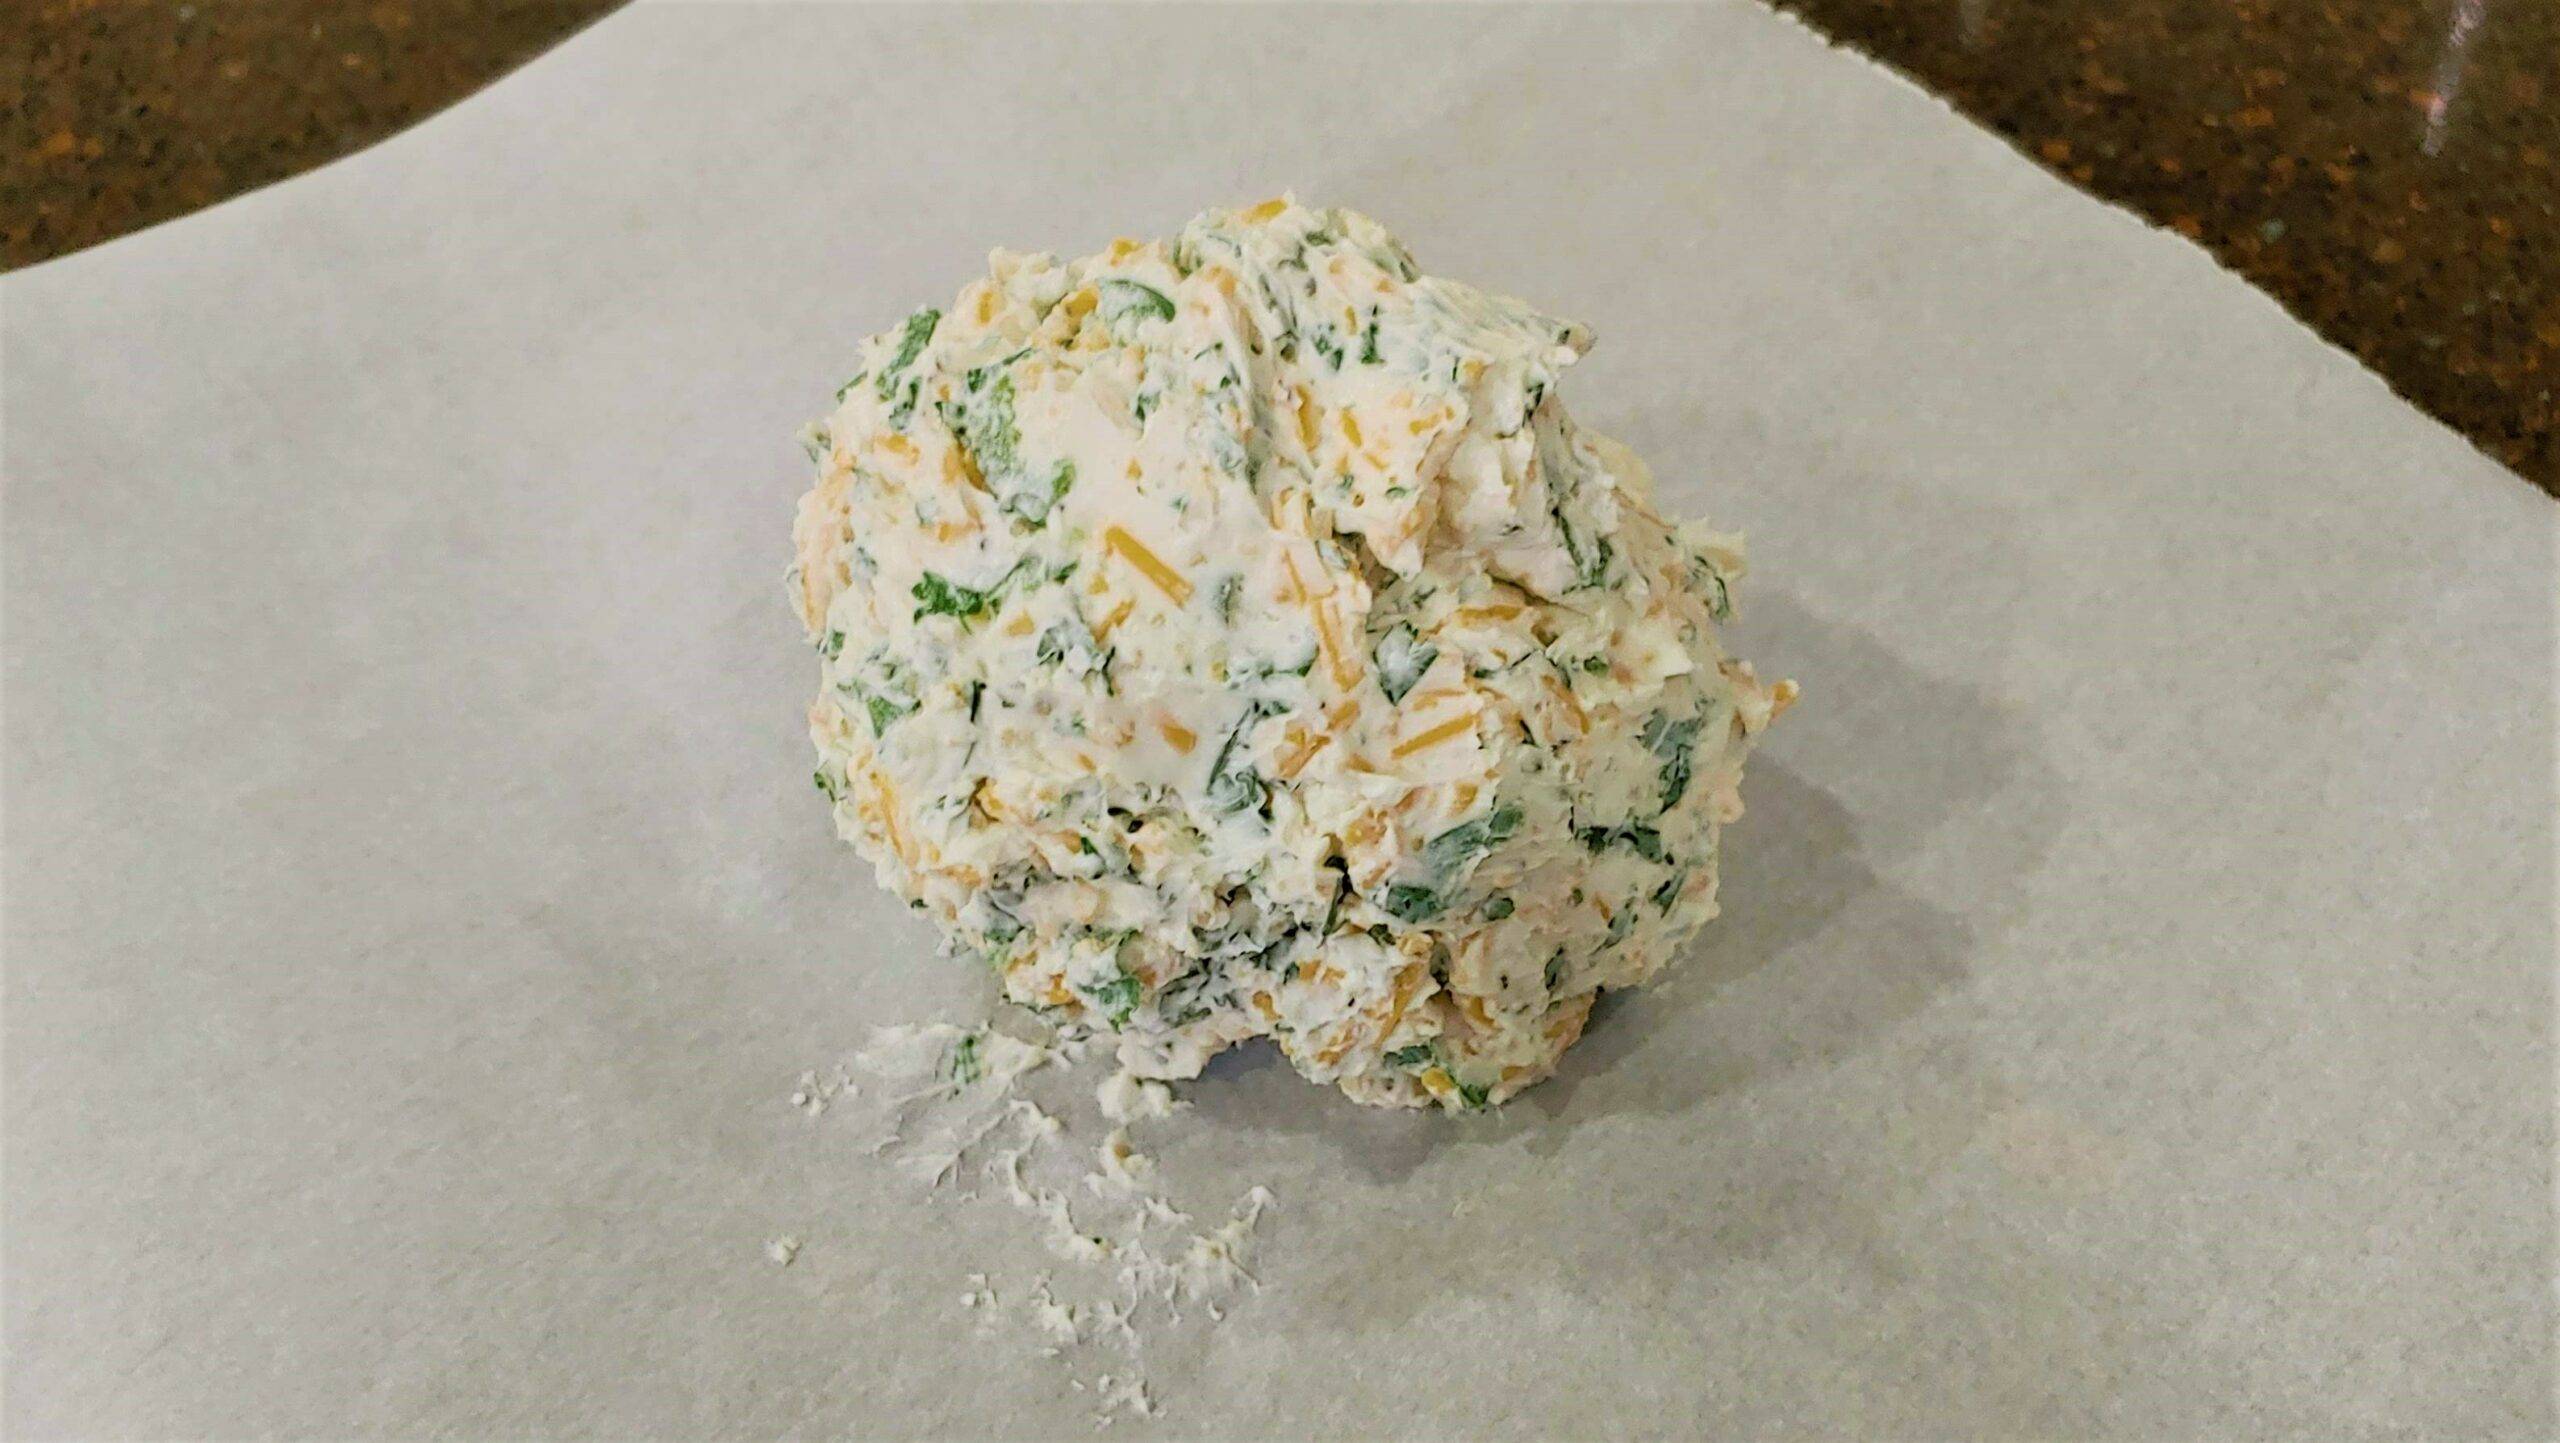 cheddar cheese ball - Dining in with Danielle